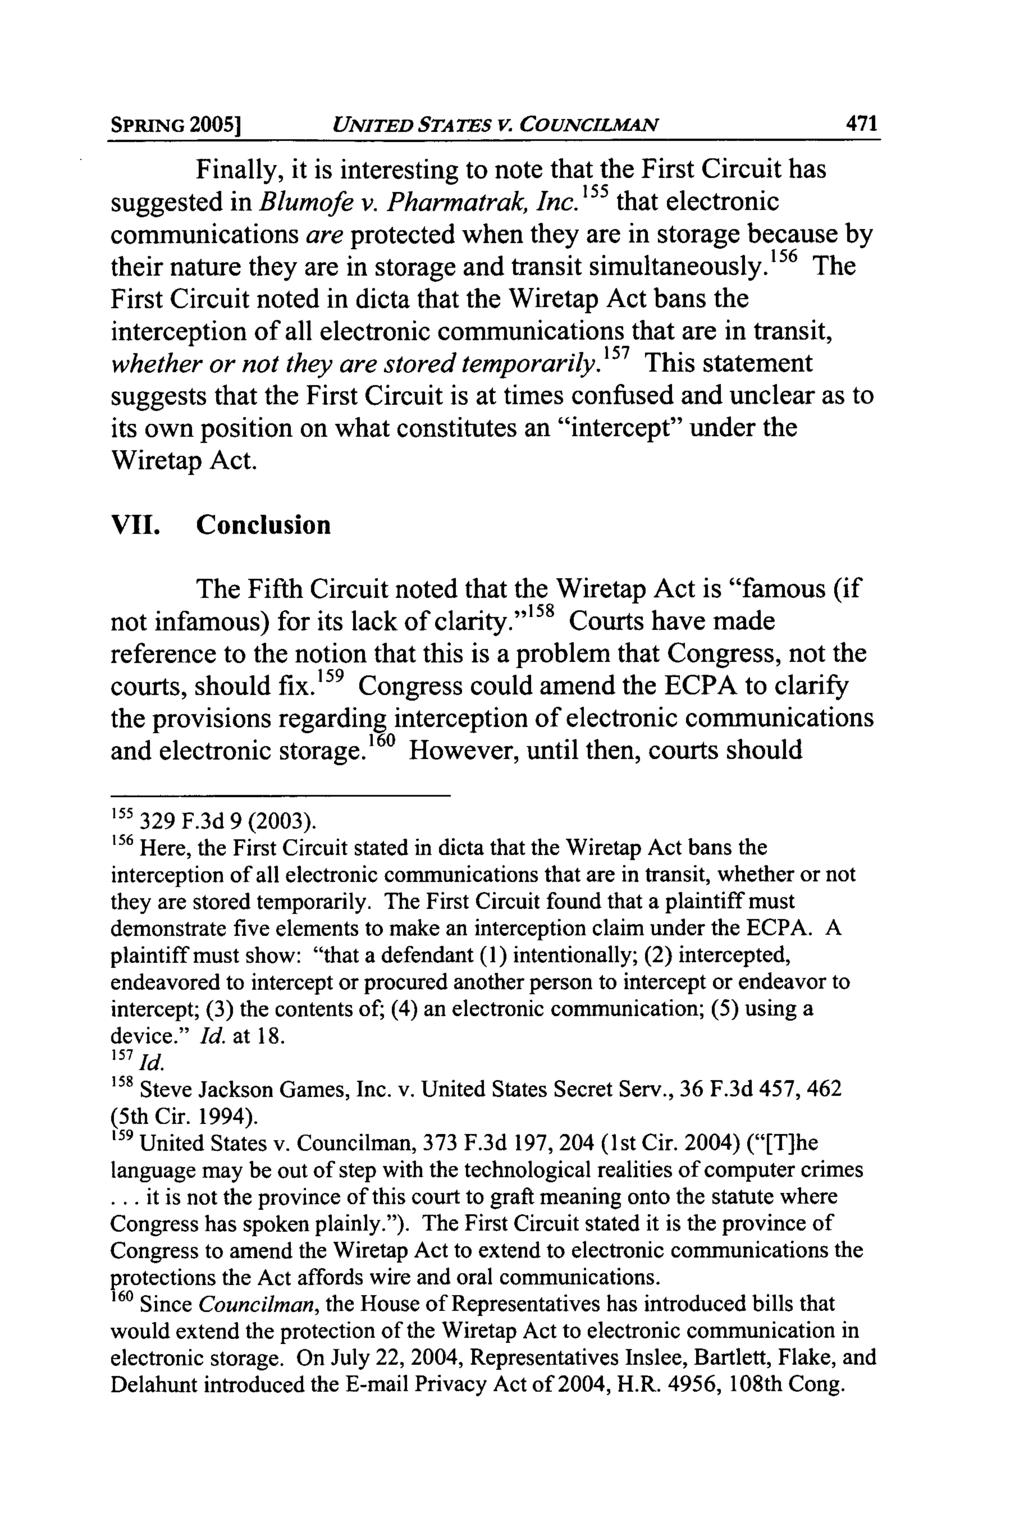 SPRING 2005] UNITED STATES V COUNCILMAN Finally, it is interesting to note that the First Circuit has suggested in Blumofe v. Pharmatrak, Inc.